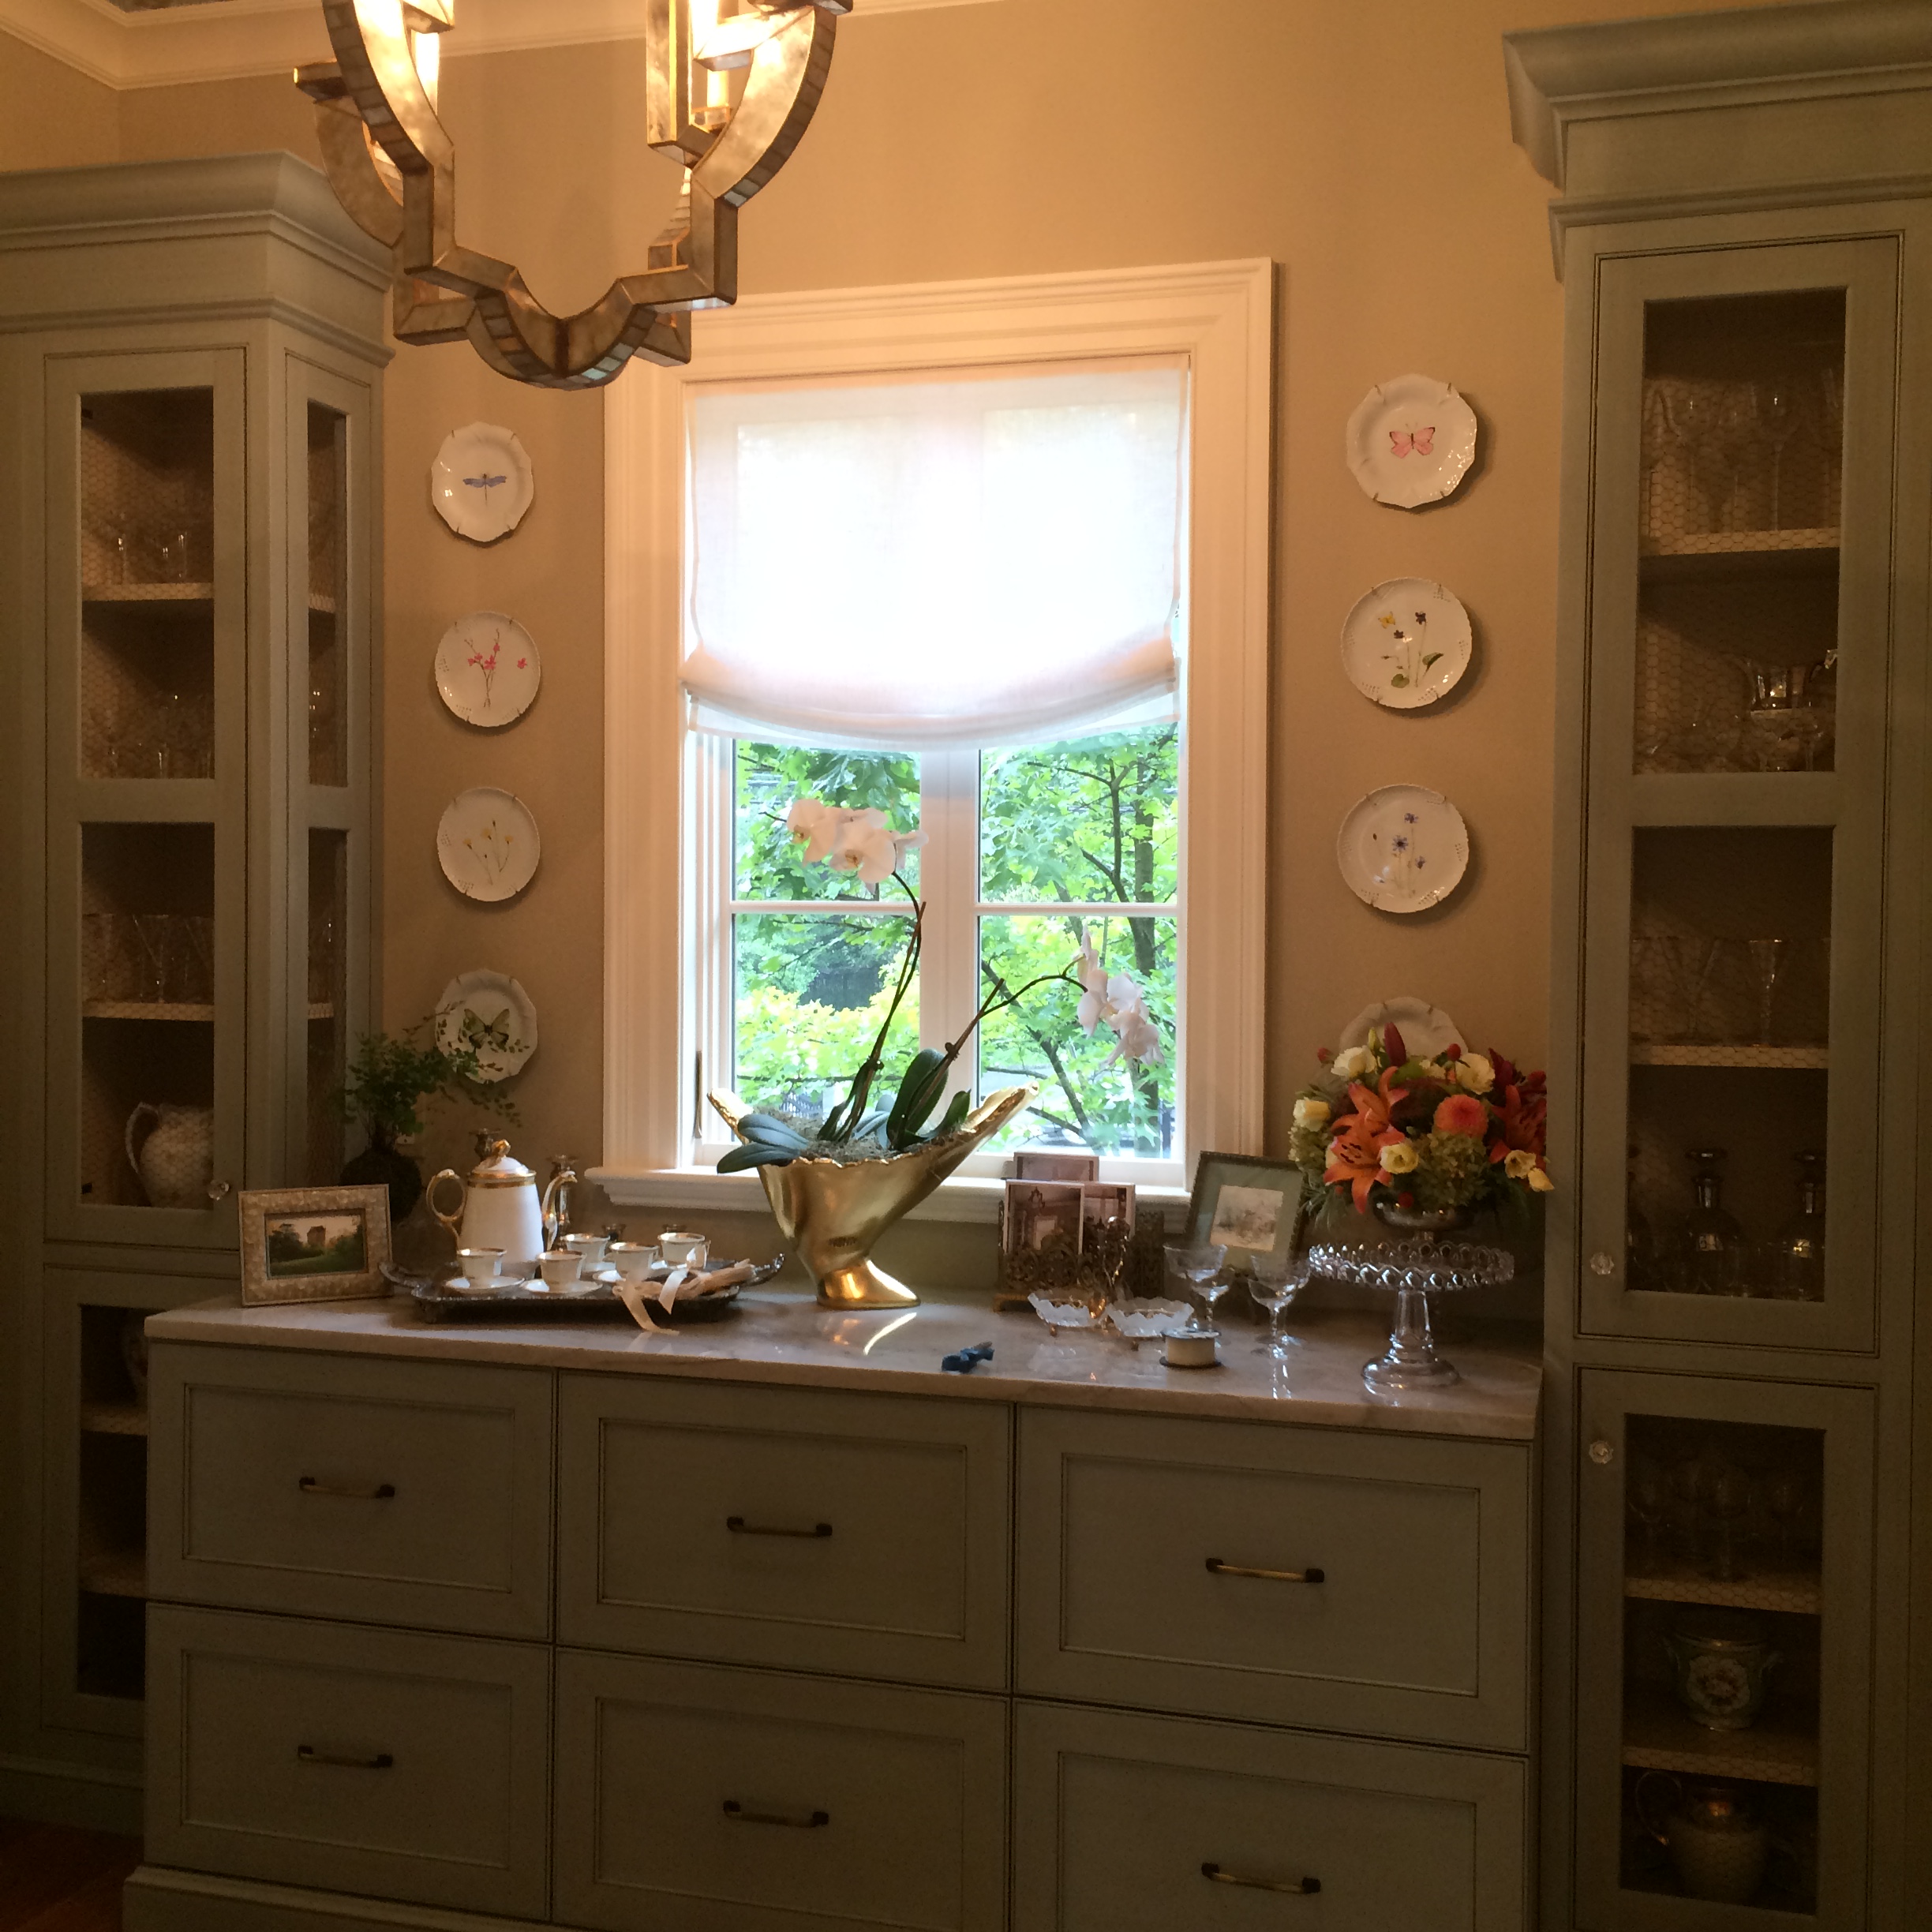 Cabinets and counter top with a glimpse at Aidan Design's truly amazing lighting.